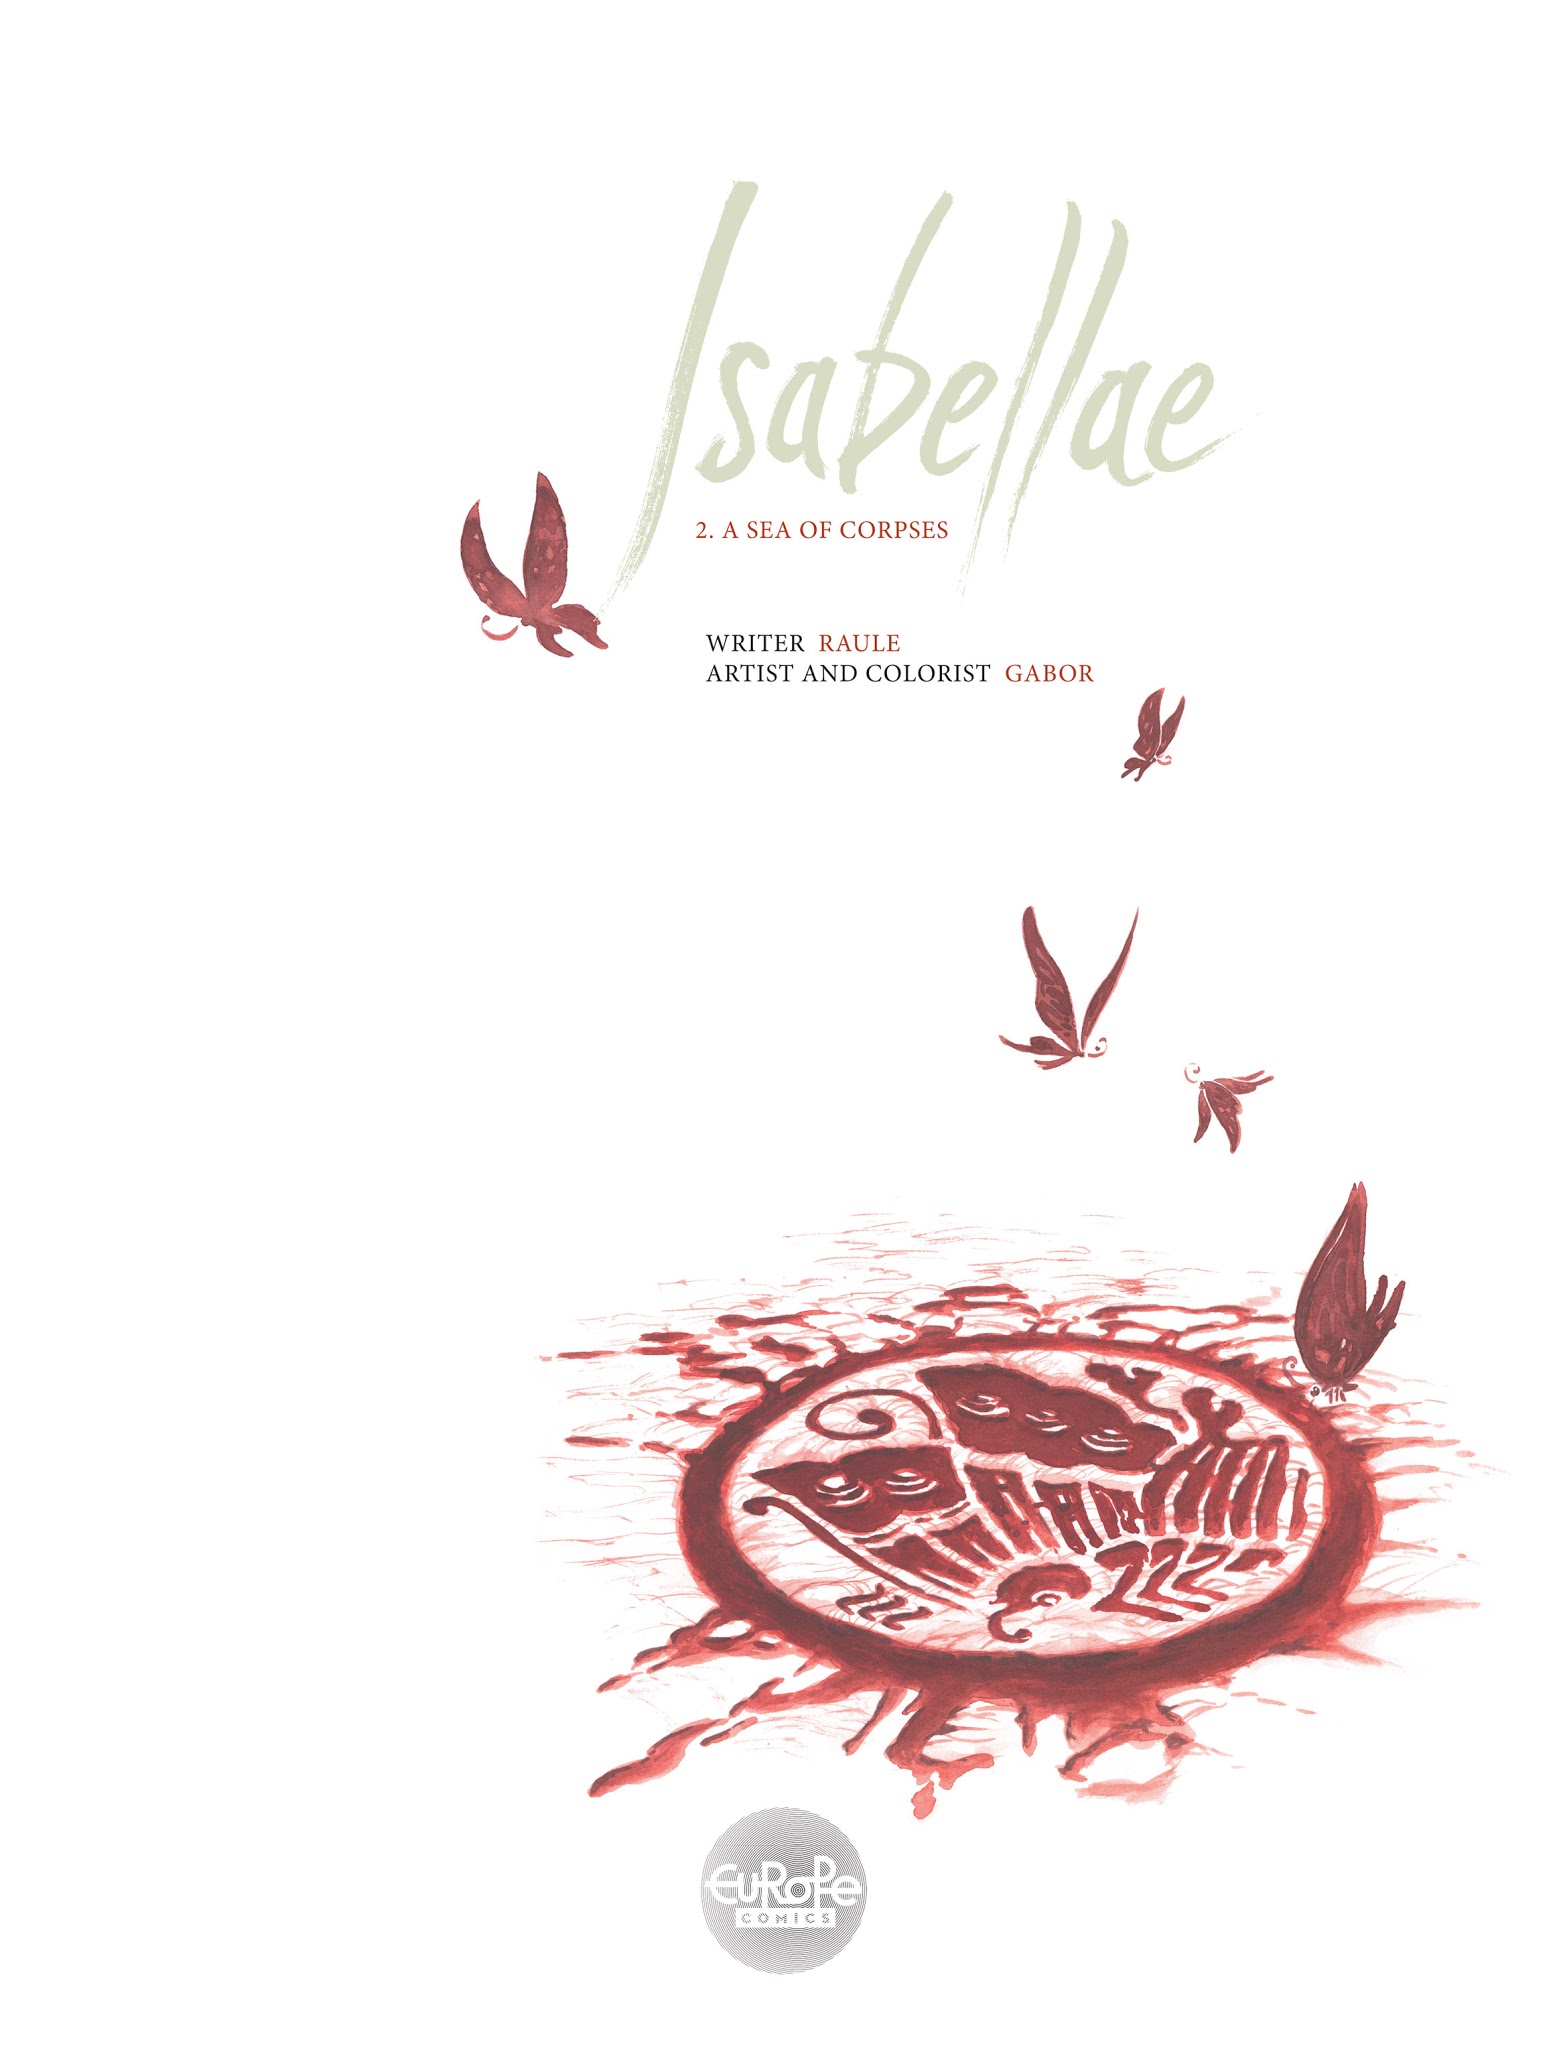 Read online Isabellae comic -  Issue #2 - 4